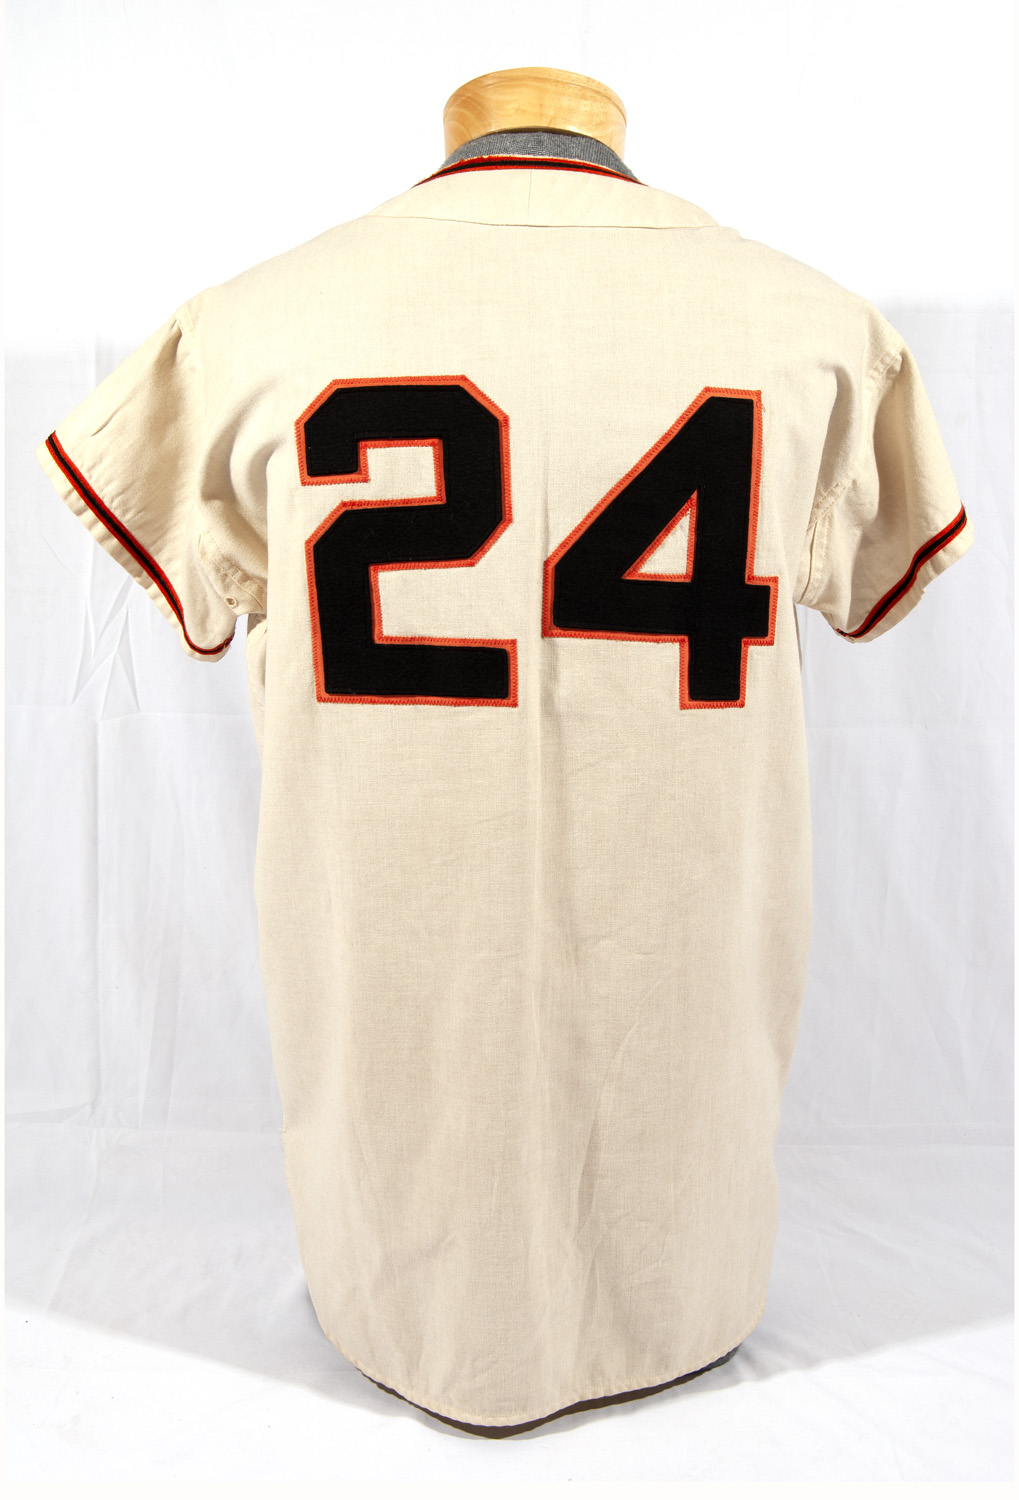 24 WILLIE MAYS New York/San Francisco Giants MLB OF Black Mint Throwback  Jersey